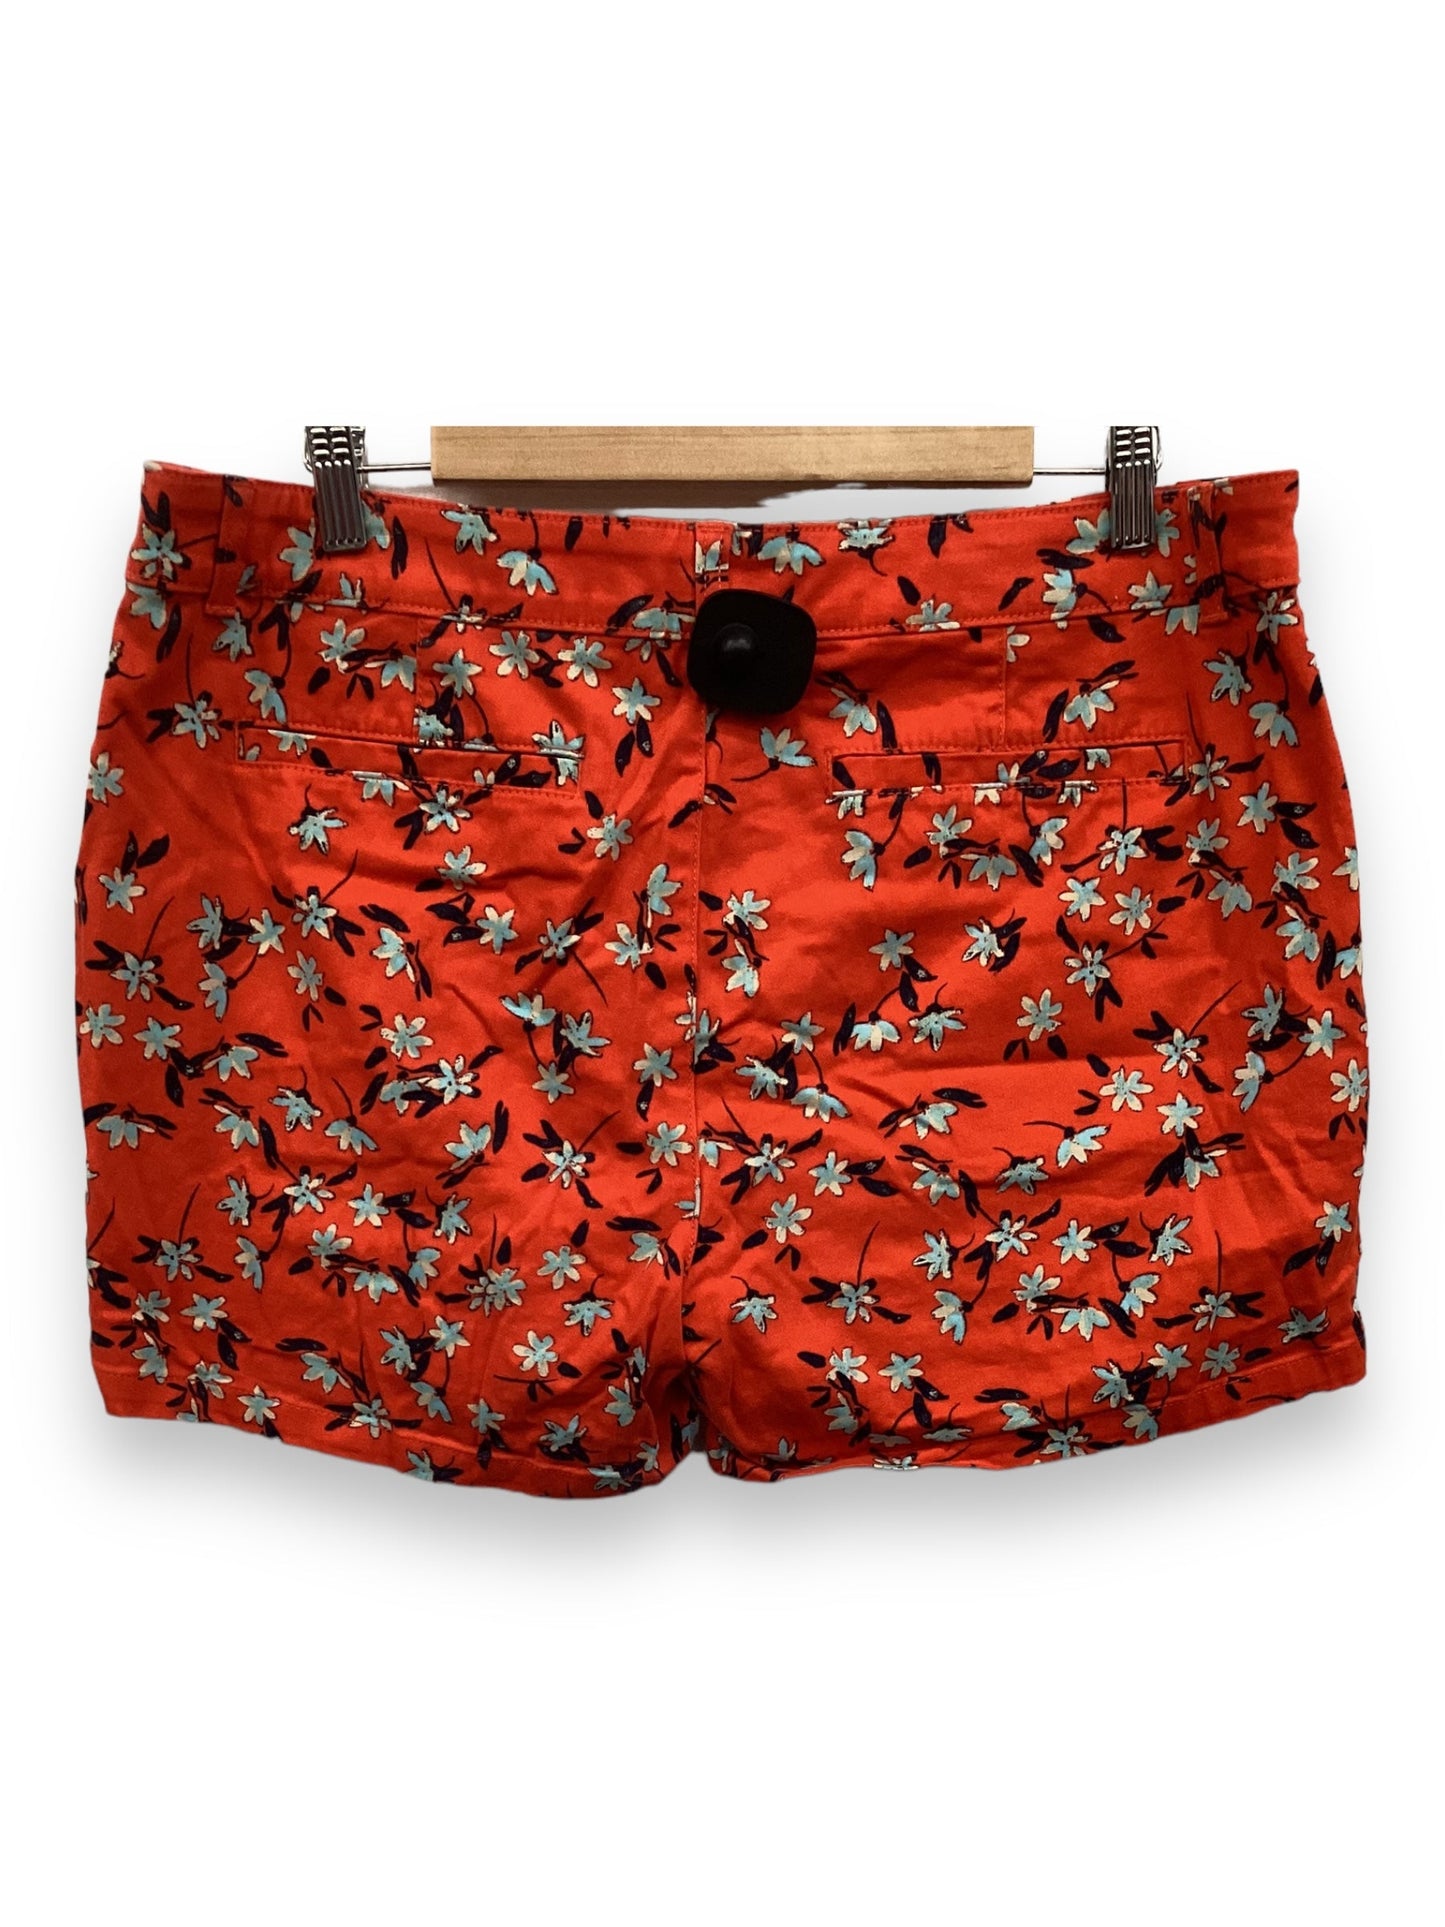 Red Shorts Ana, Size 16